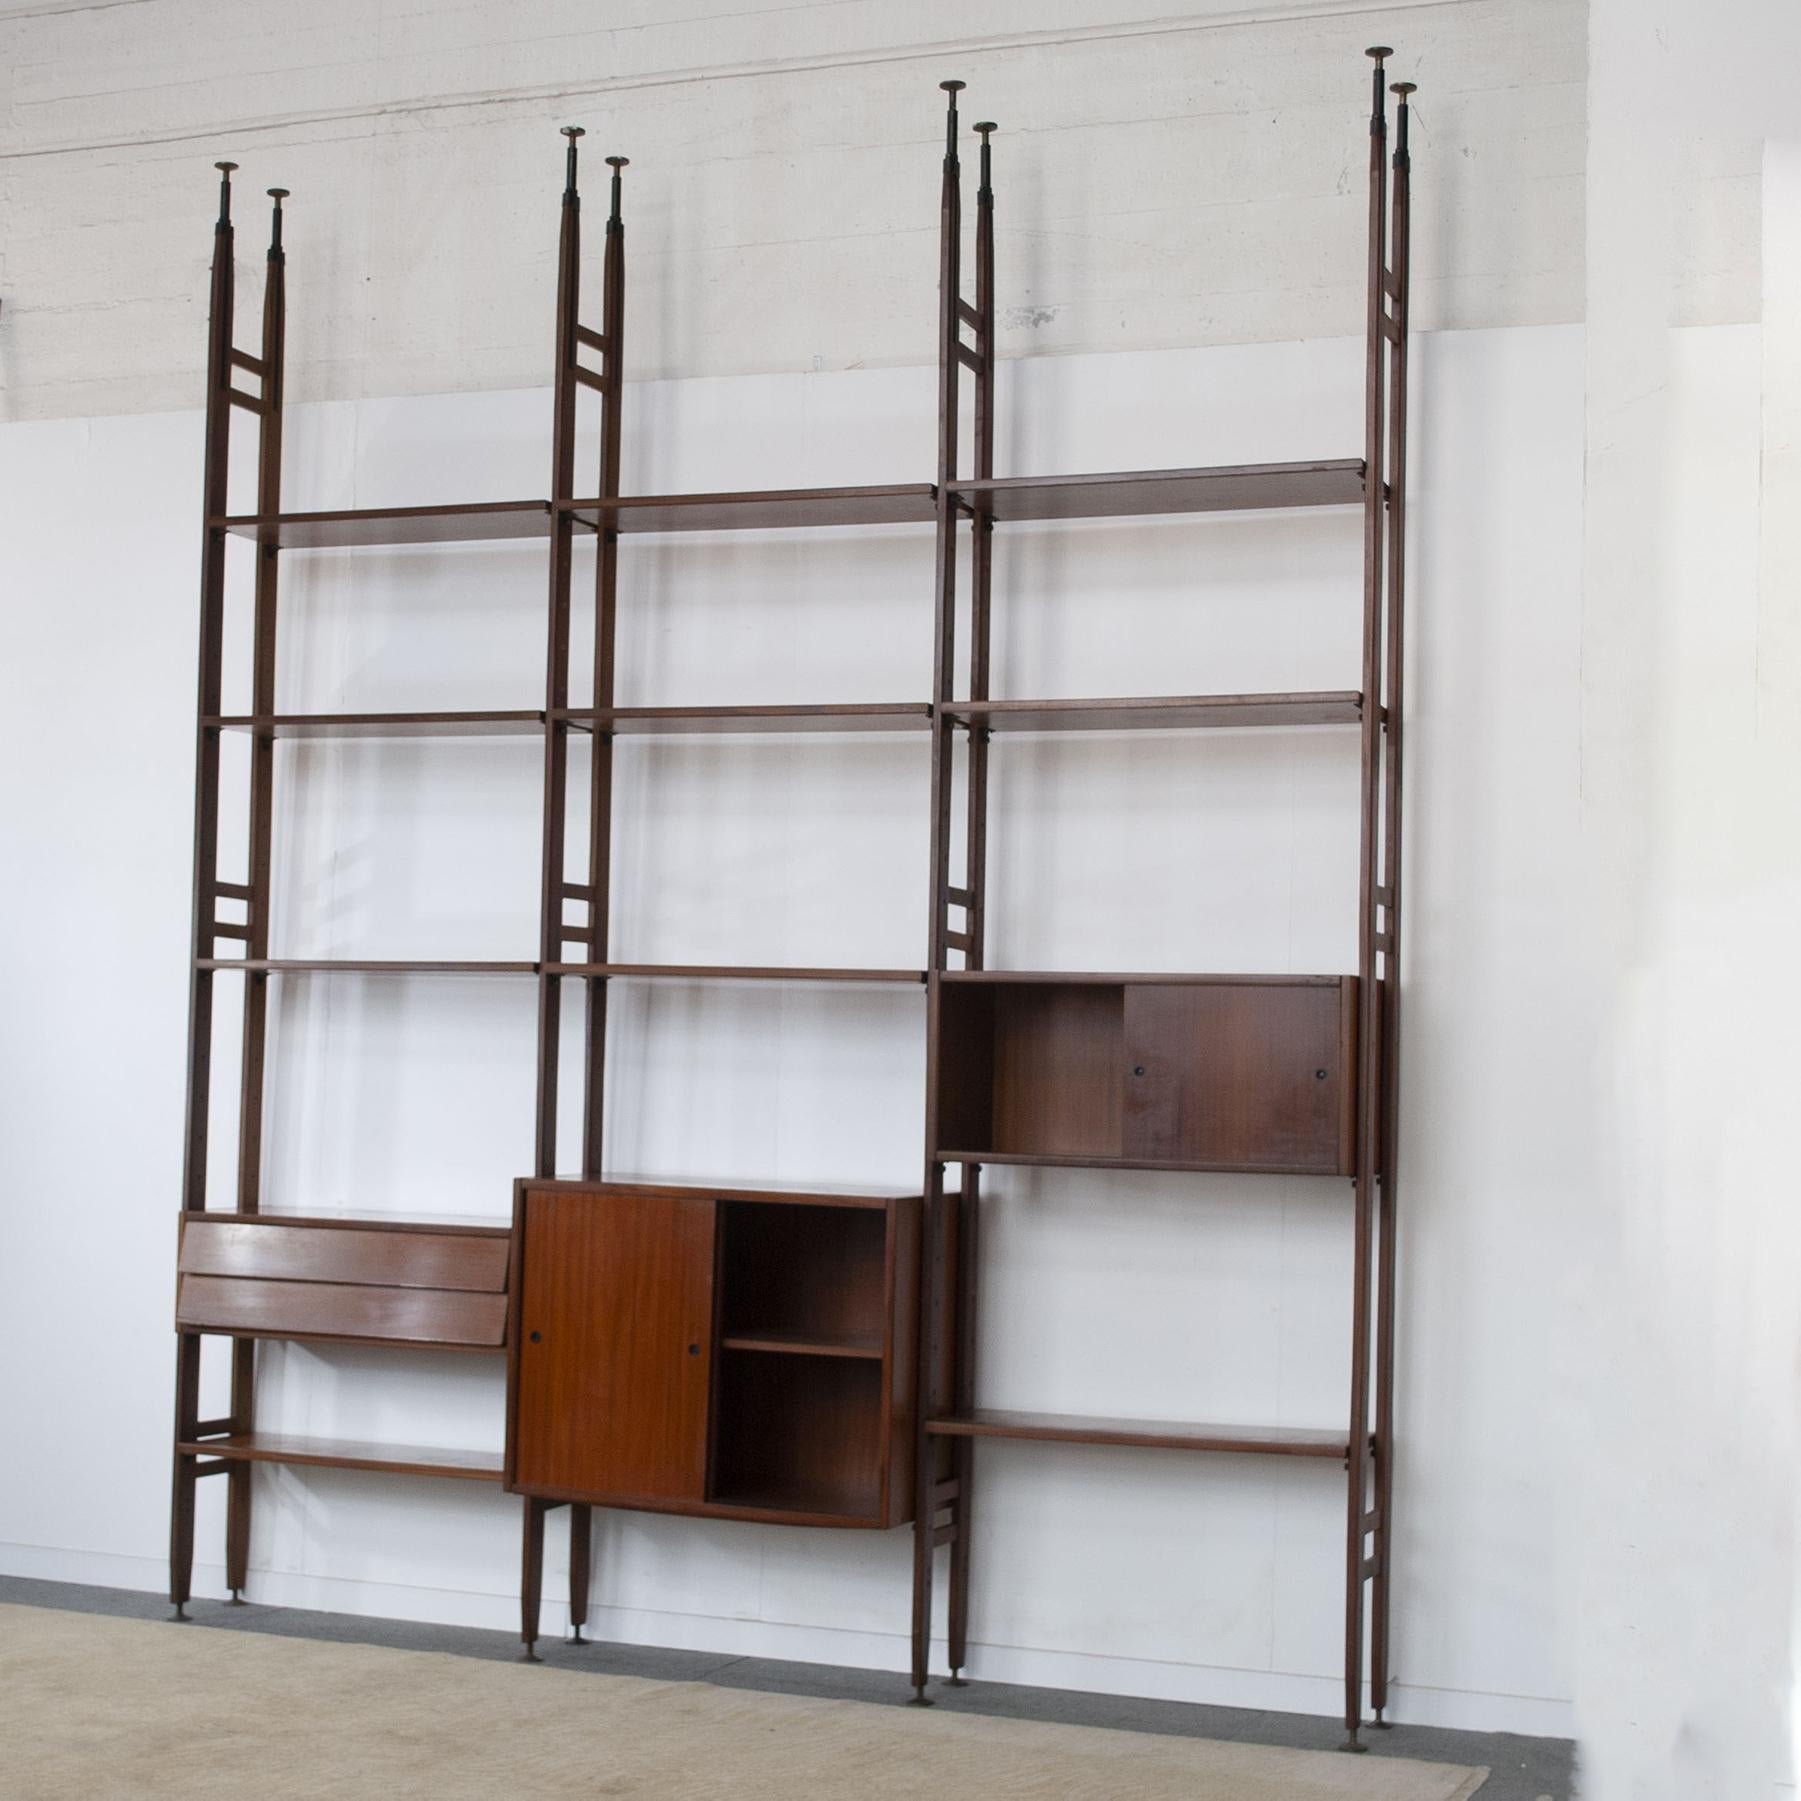 Italian Midcentury Bookcase in Wood from the Sixties 1